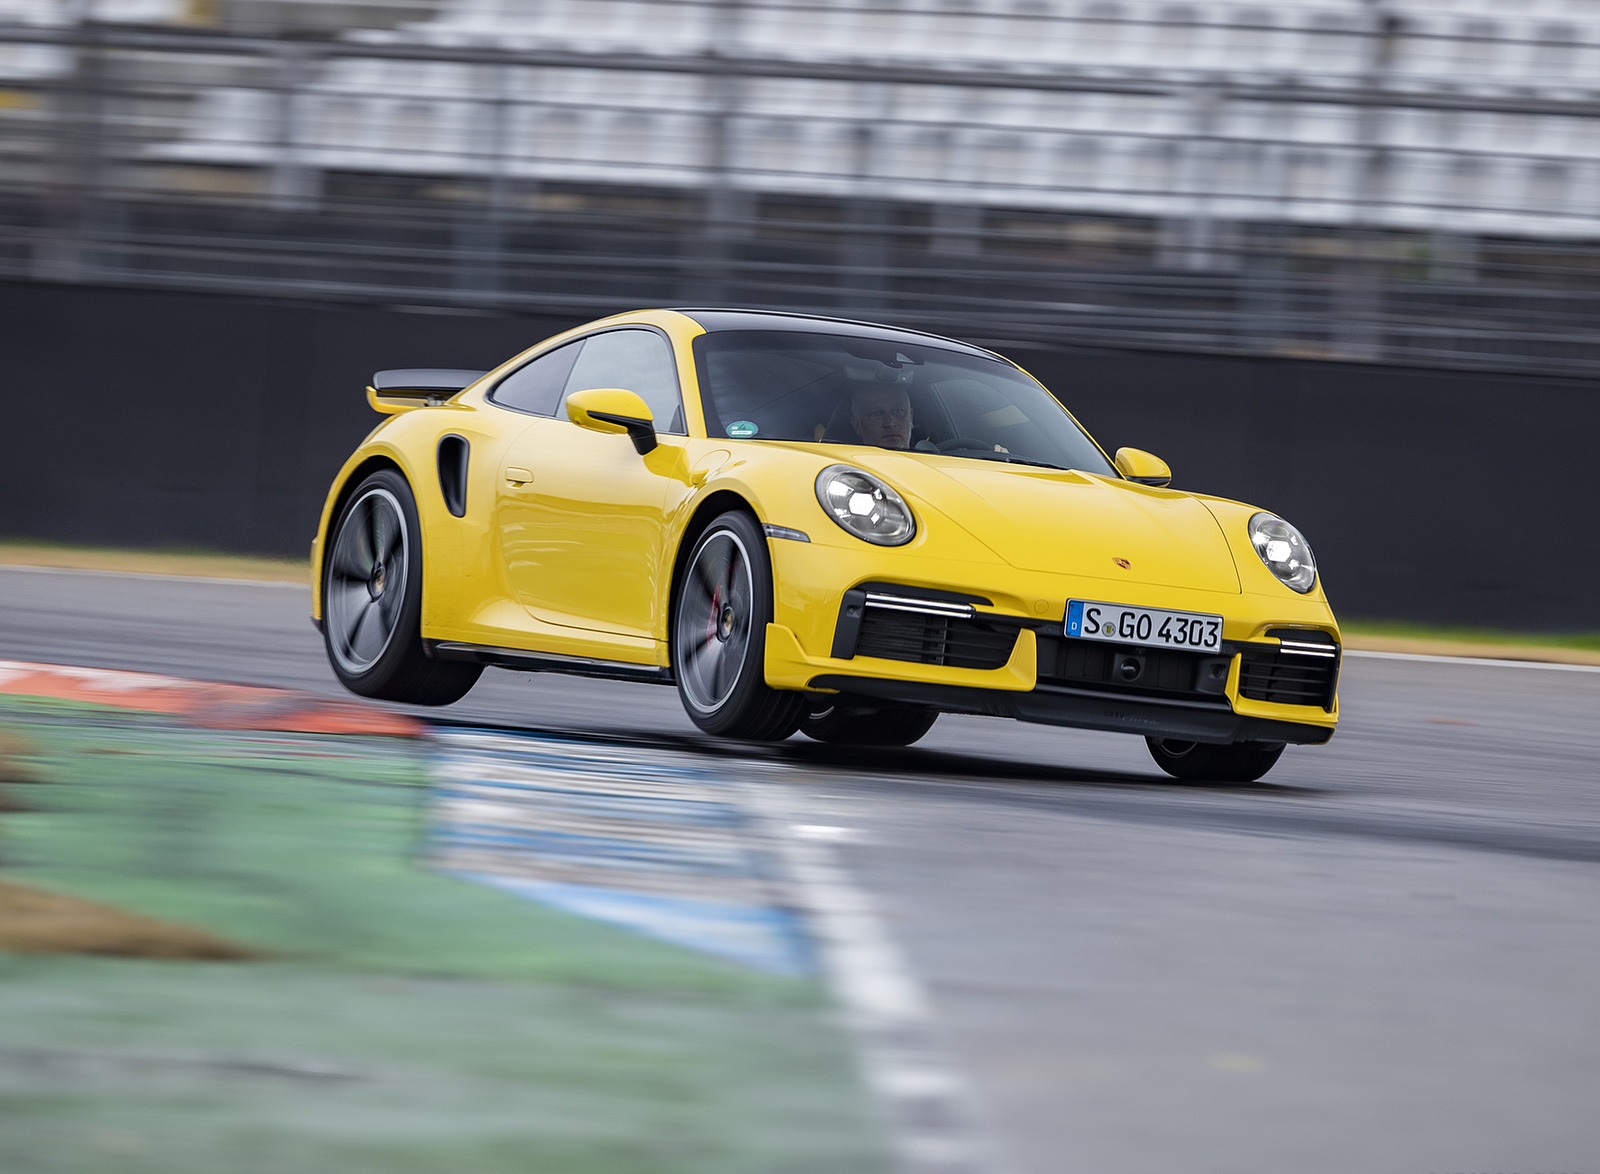 2021 Porsche 911 Turbo (Color: Racing Yellow) Front Three-Quarter Wallpapers  #12 of 225